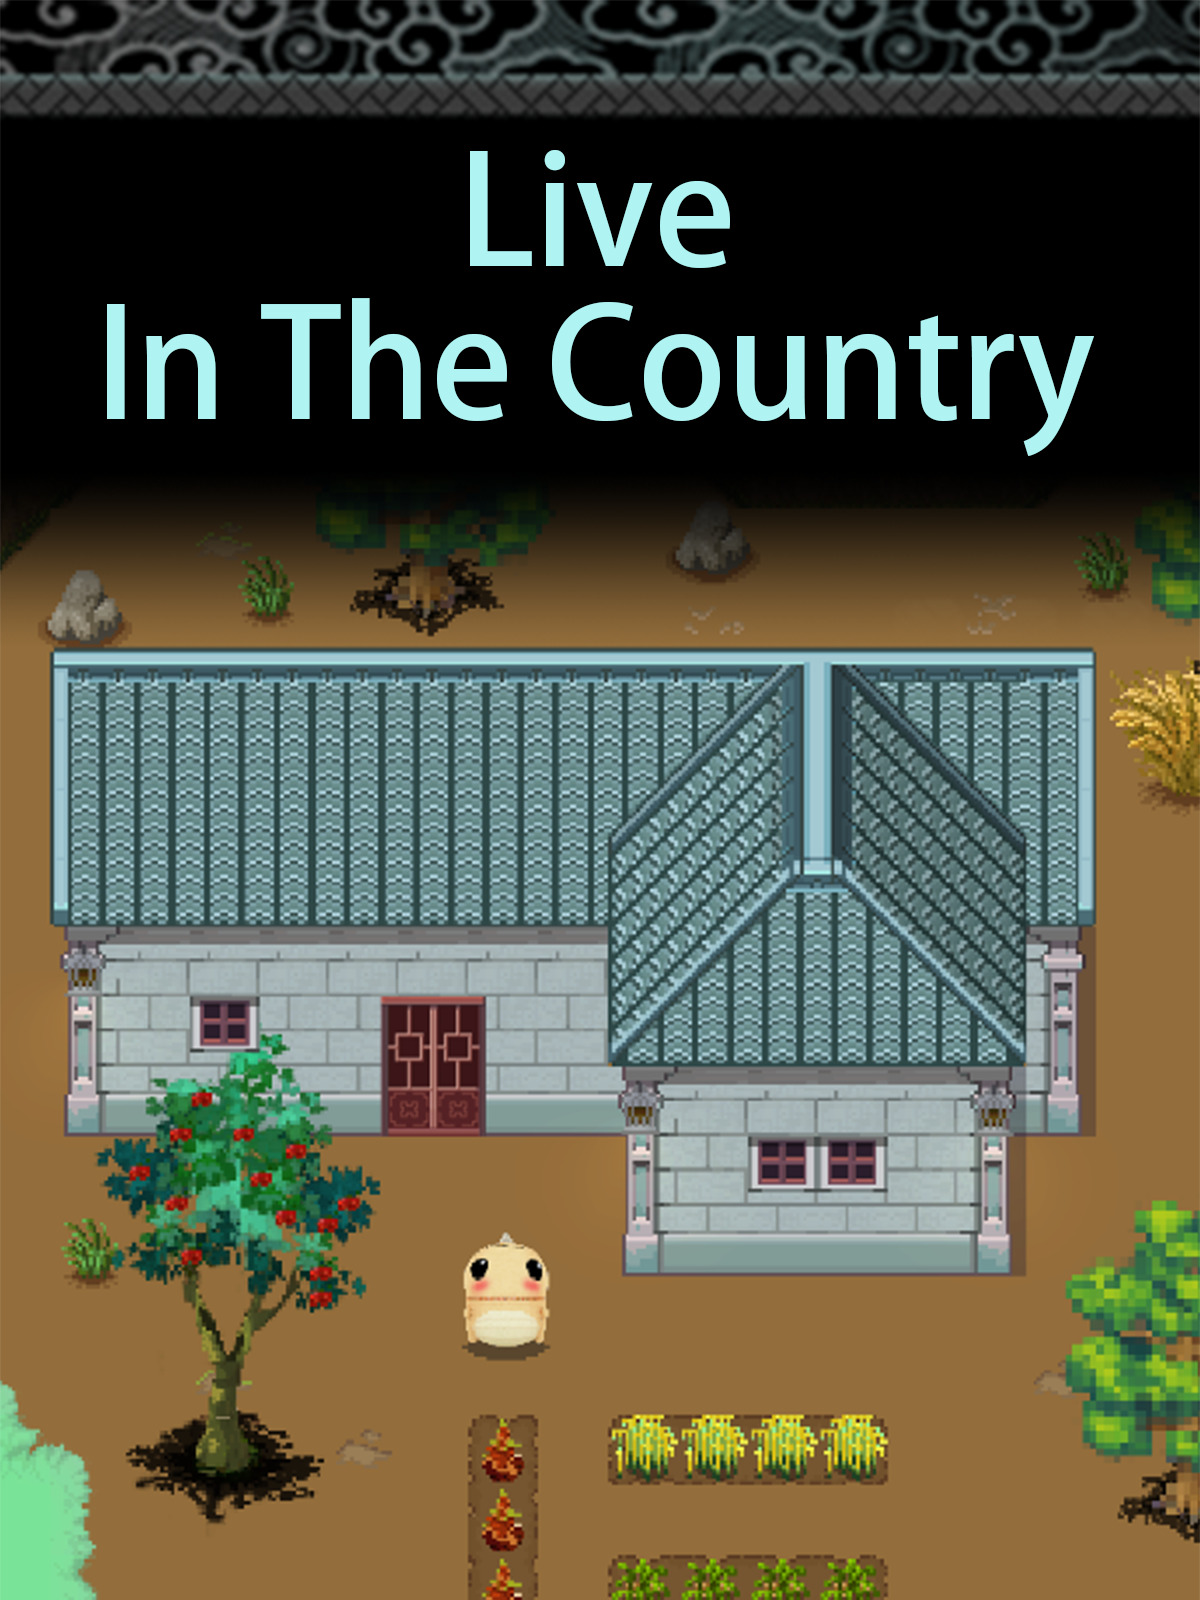 Live In The Country - Metacritic